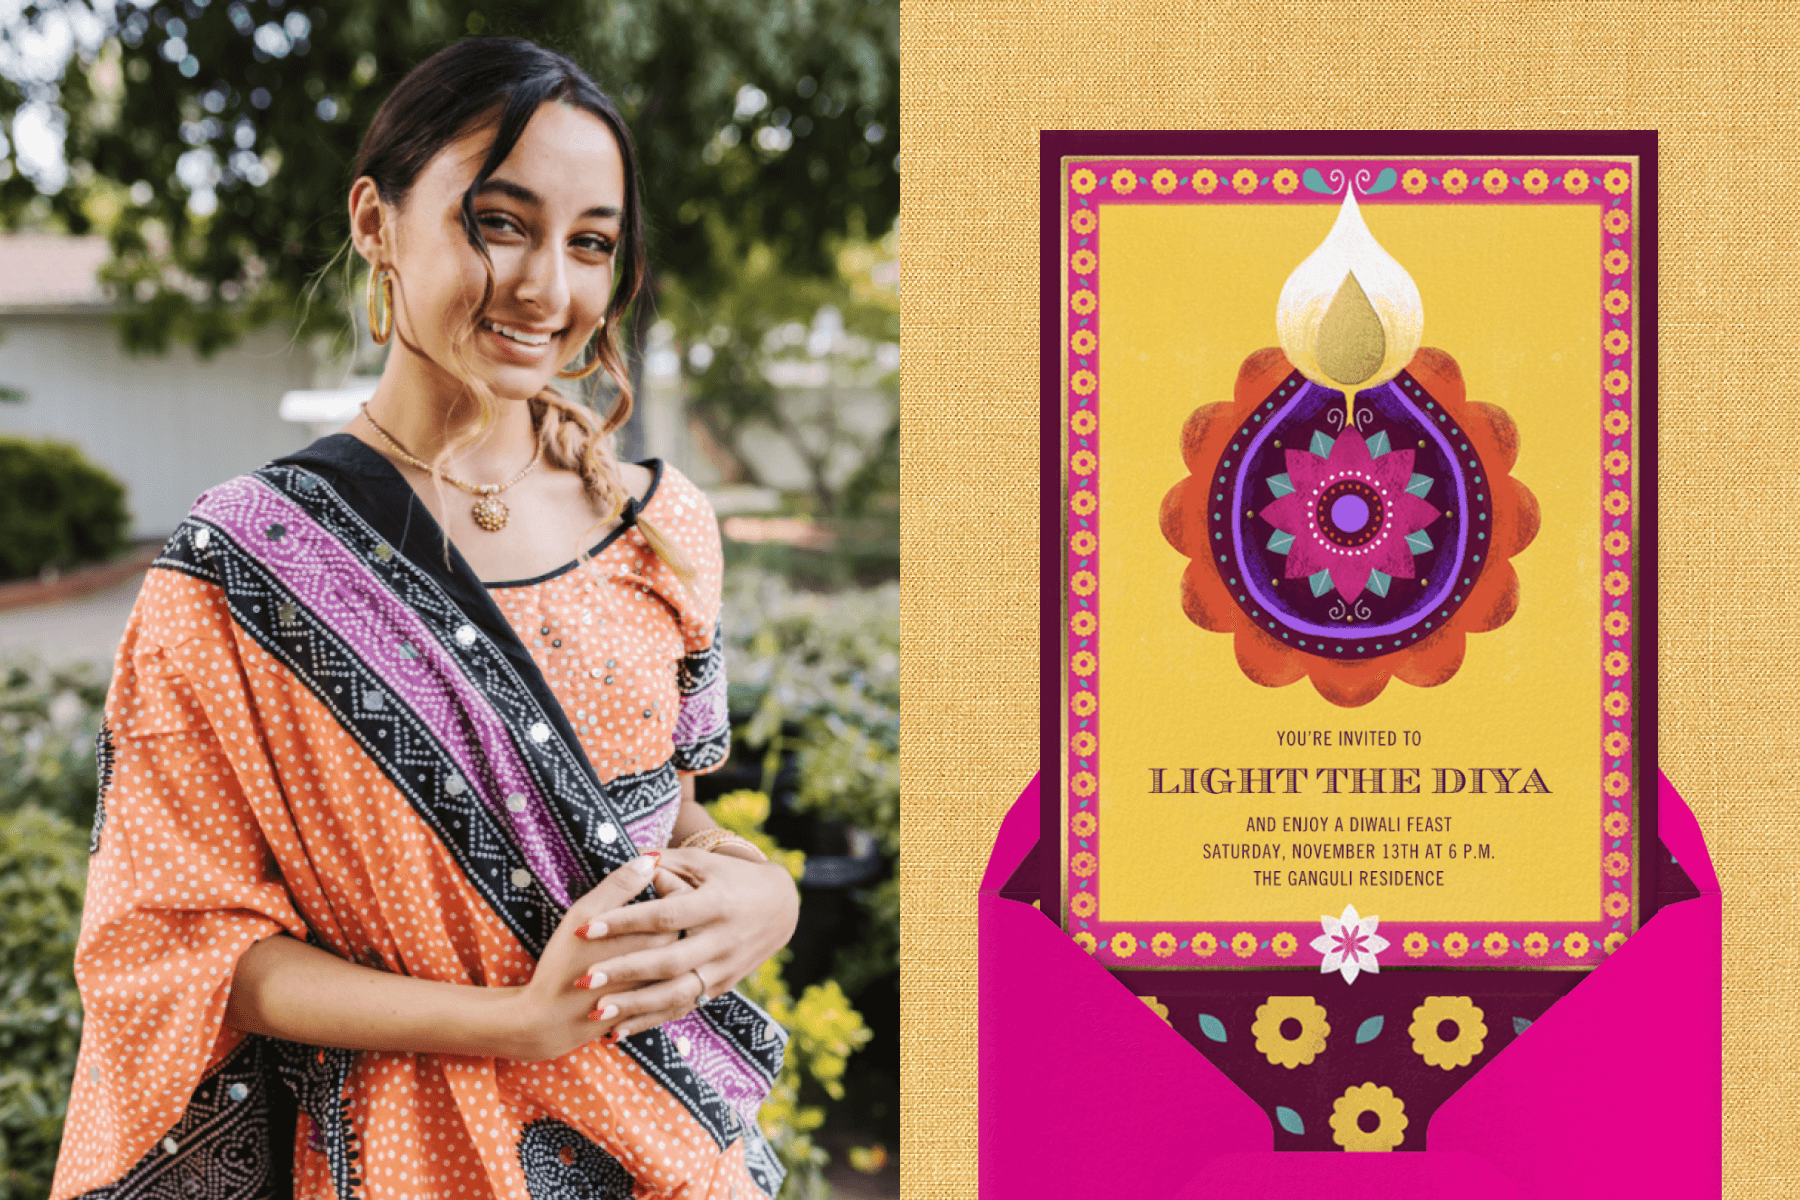 Left: A young woman dresses in a sari for Diwali. Right: A yellow Diwali invitation with a diya illustration